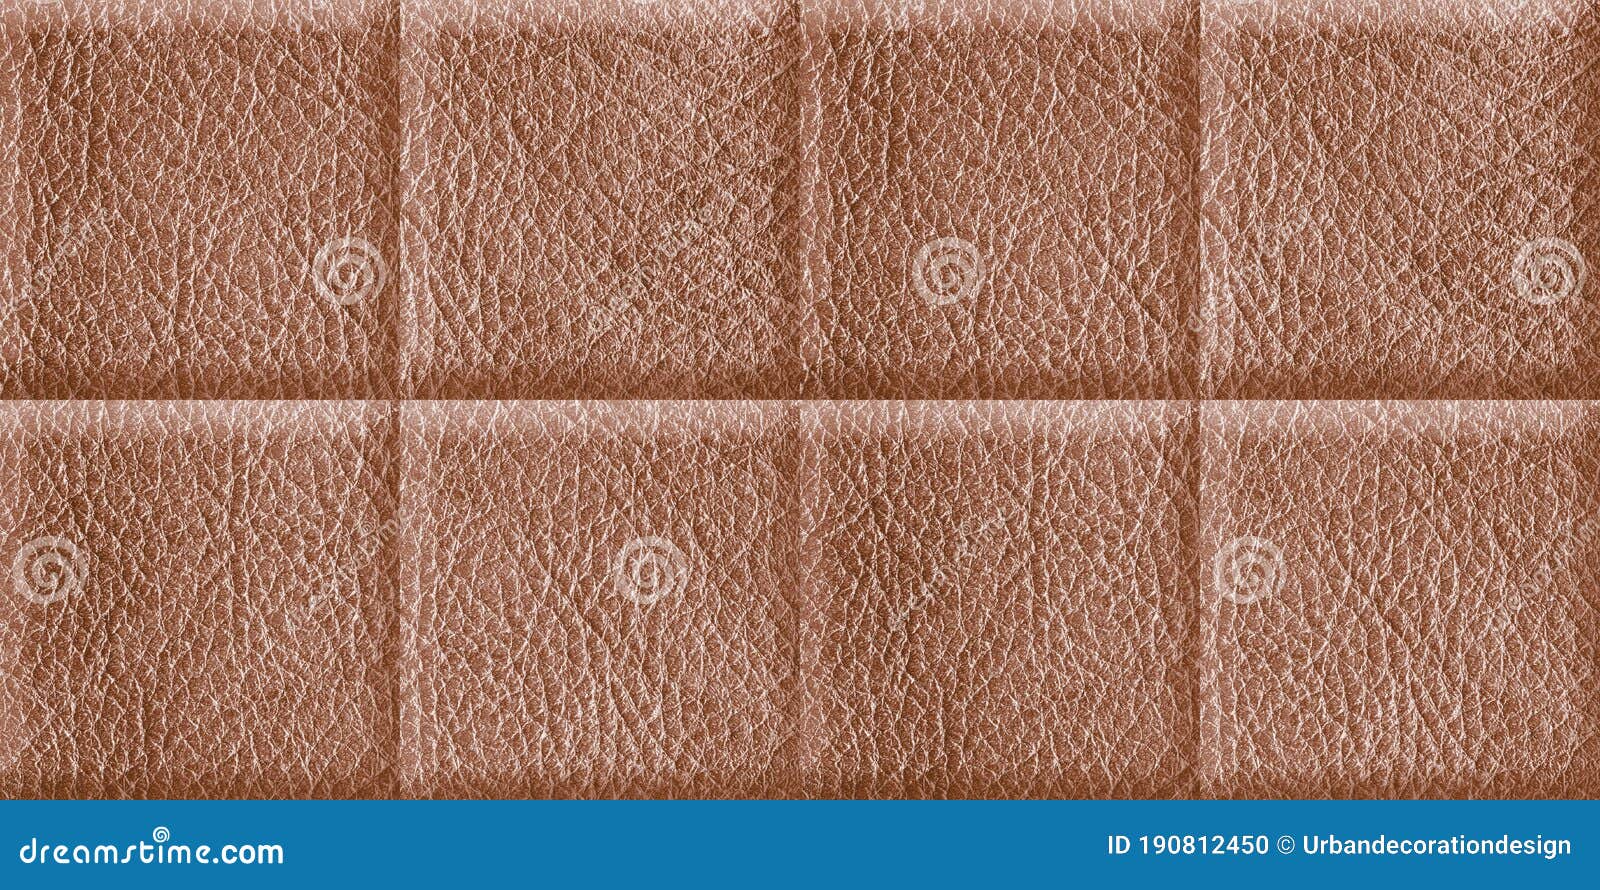 brown colored leathers background textures s.